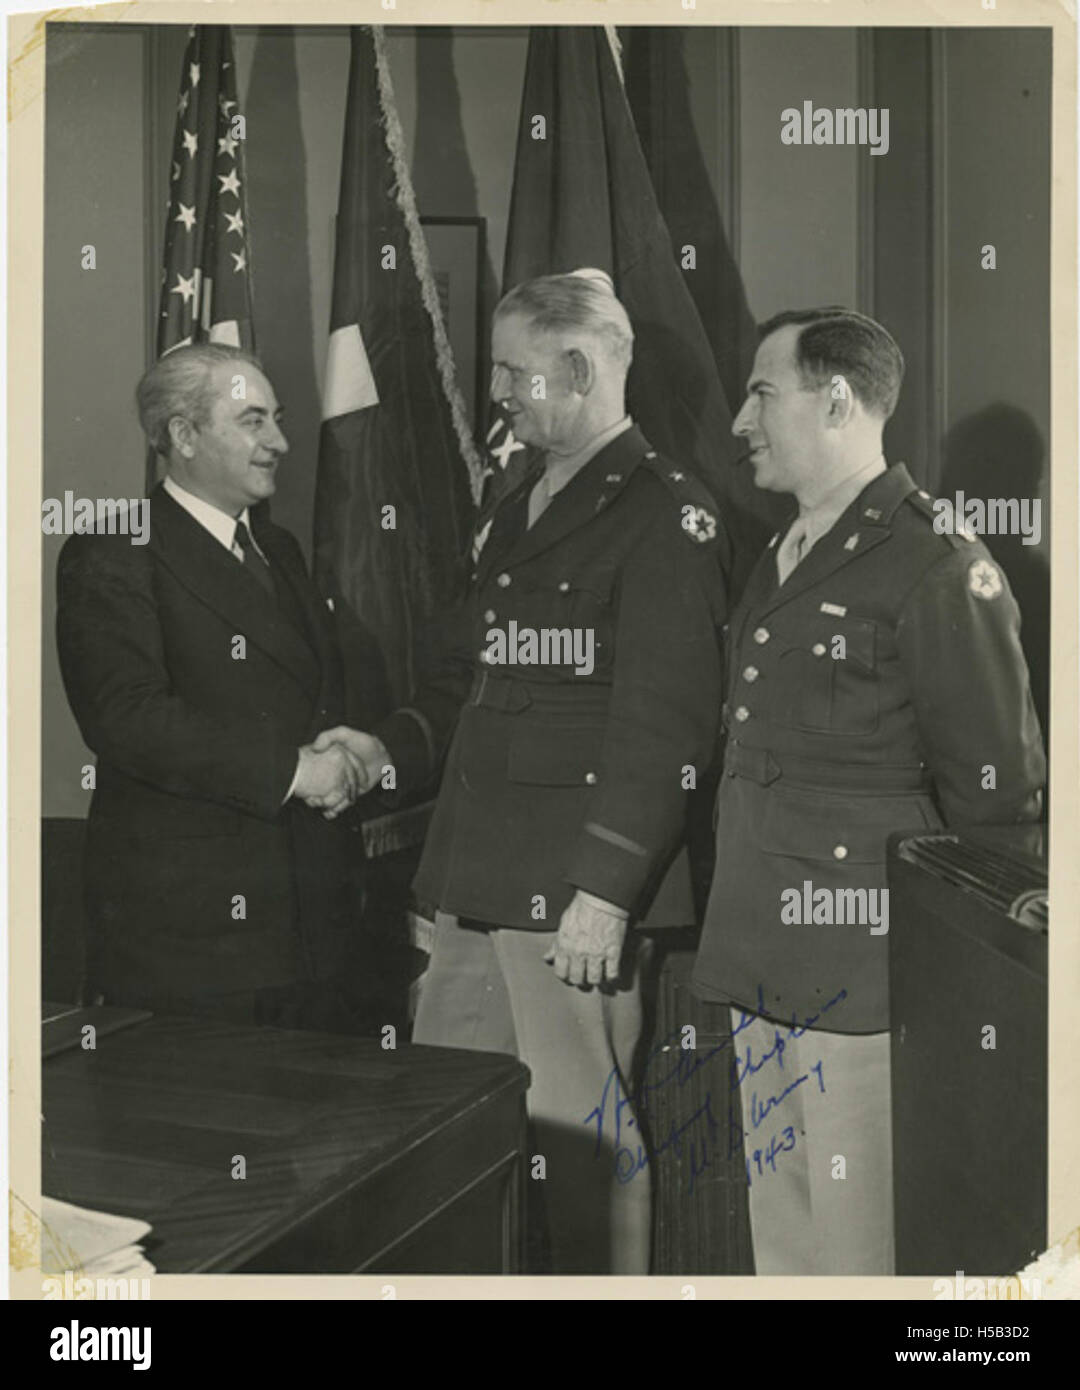 Rabbi Barnett R. Brickner and Chaplain Aryeh Lev meeting with Chief of Chaplains William R. Arnold before overseas tour Stock Photo